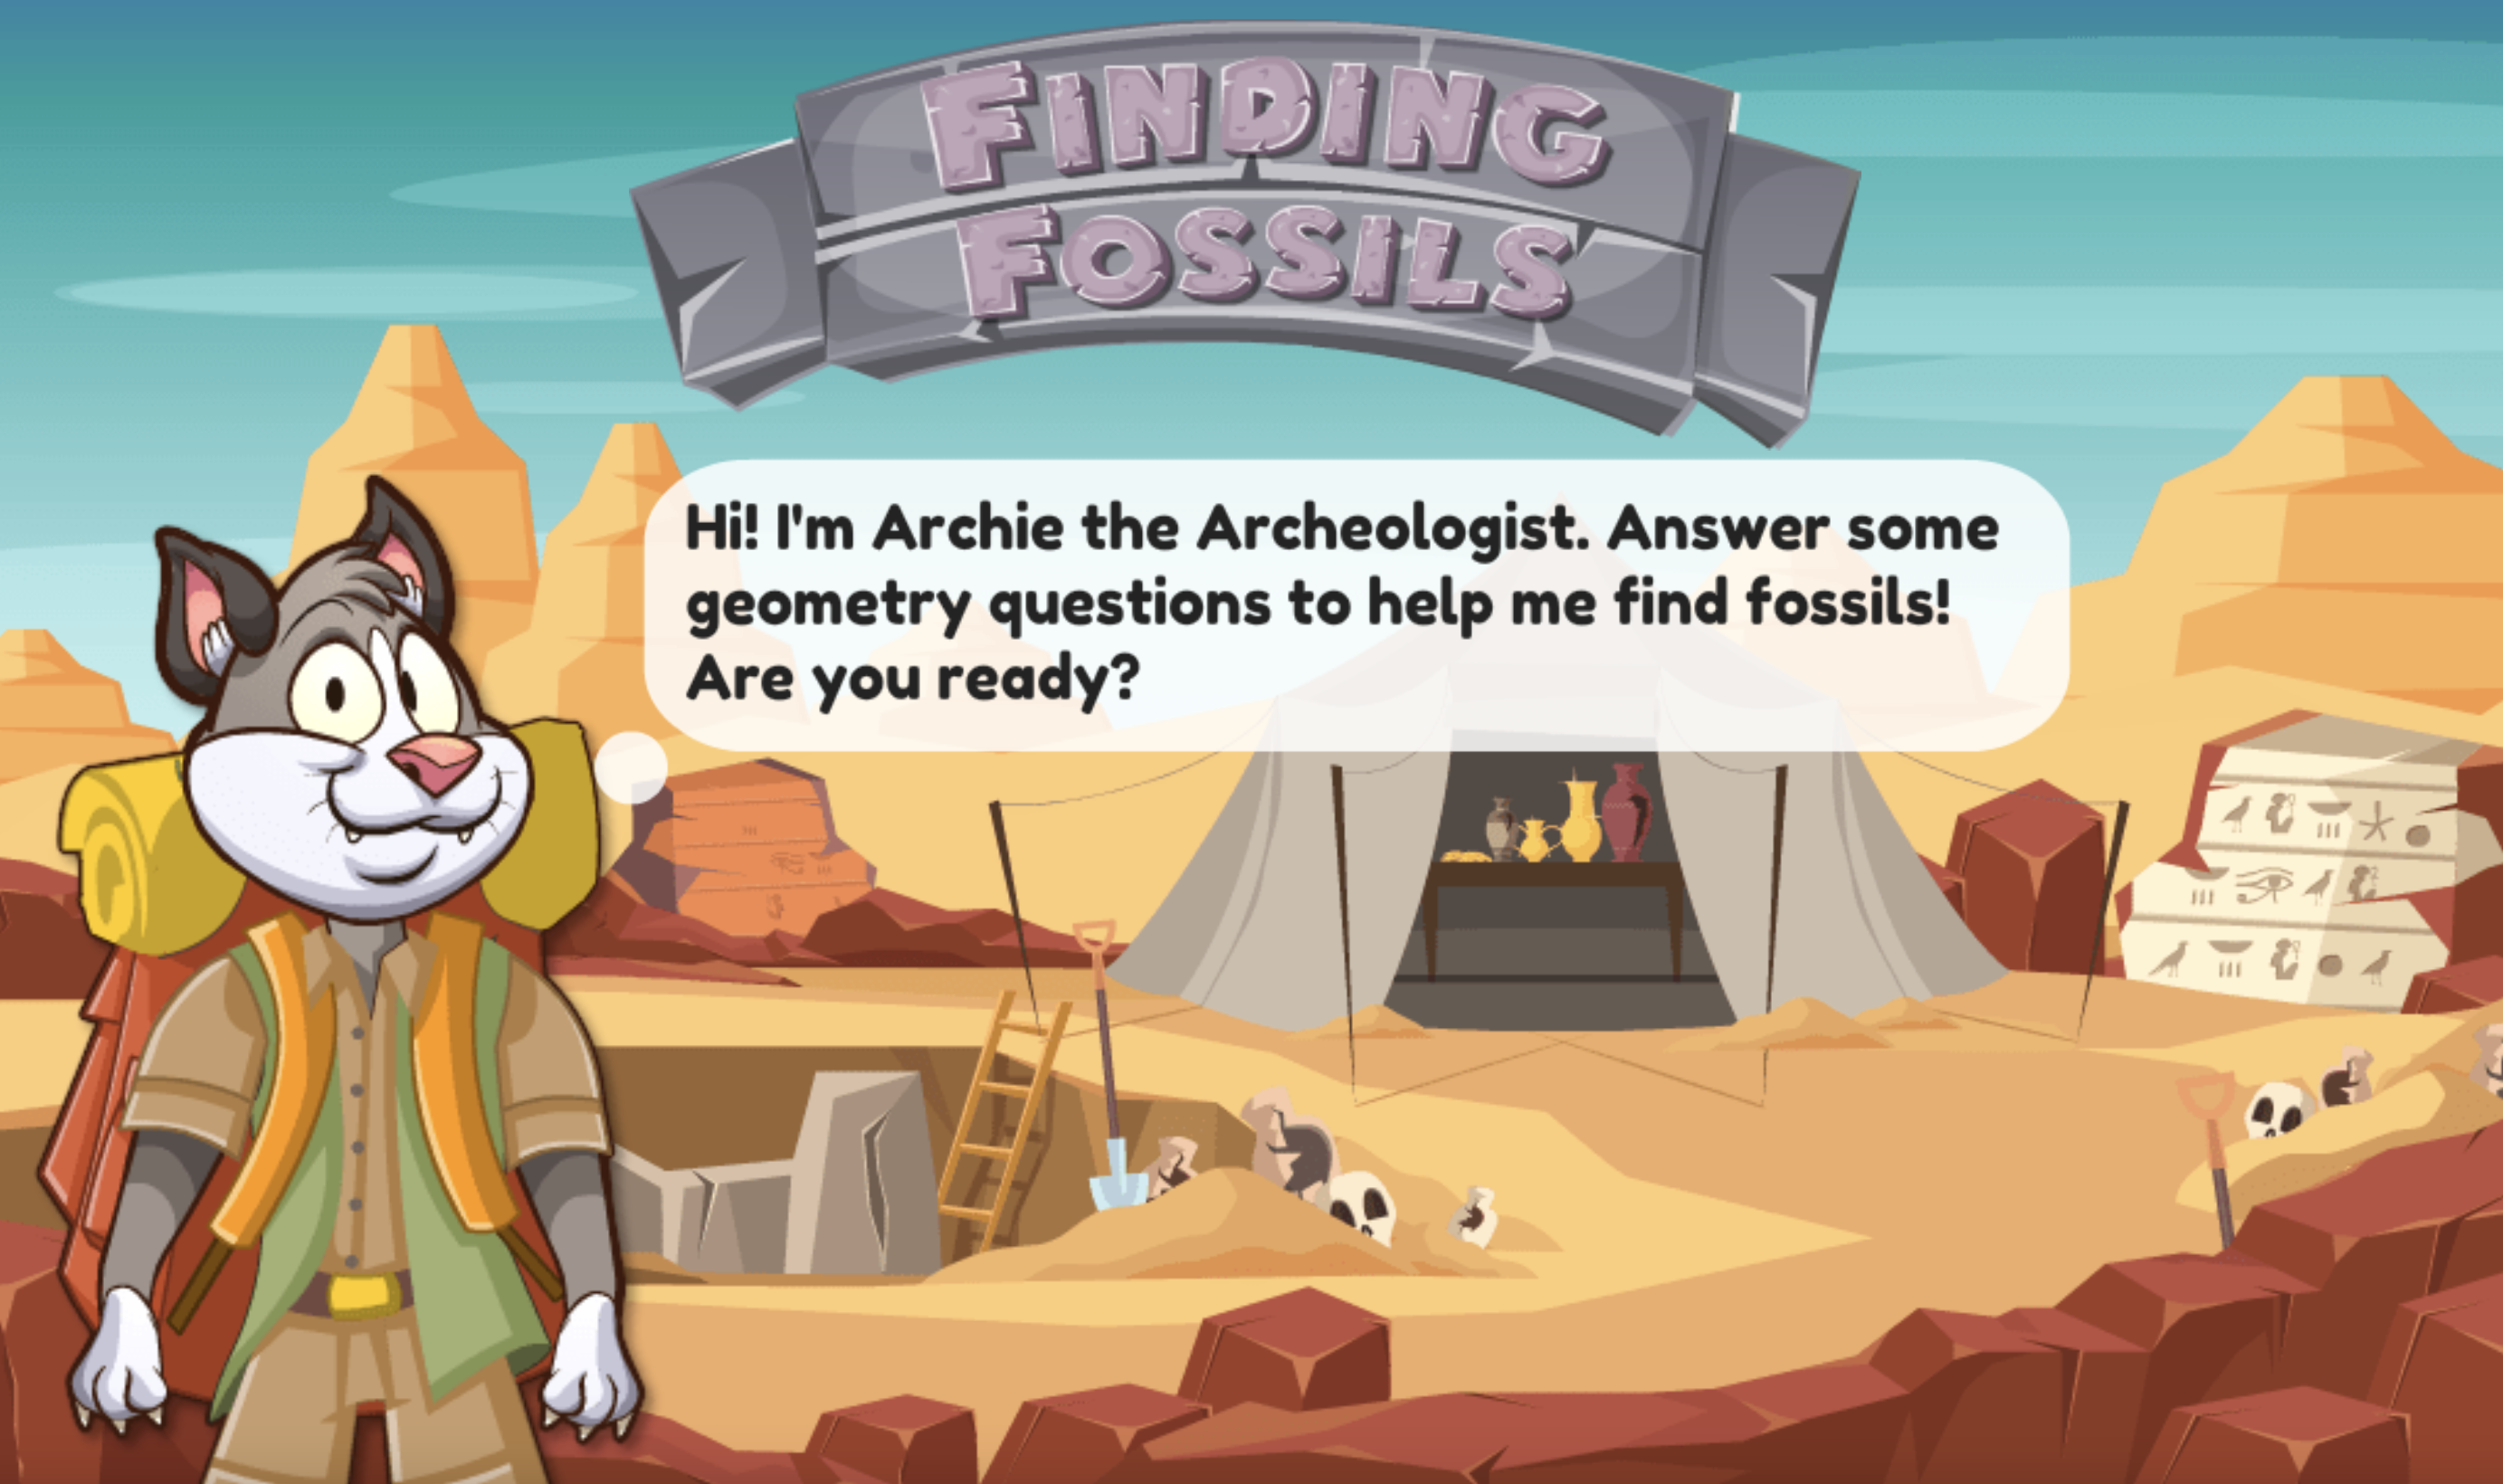 Help Archie the Archaeologist find fossils by answering his questions correctly